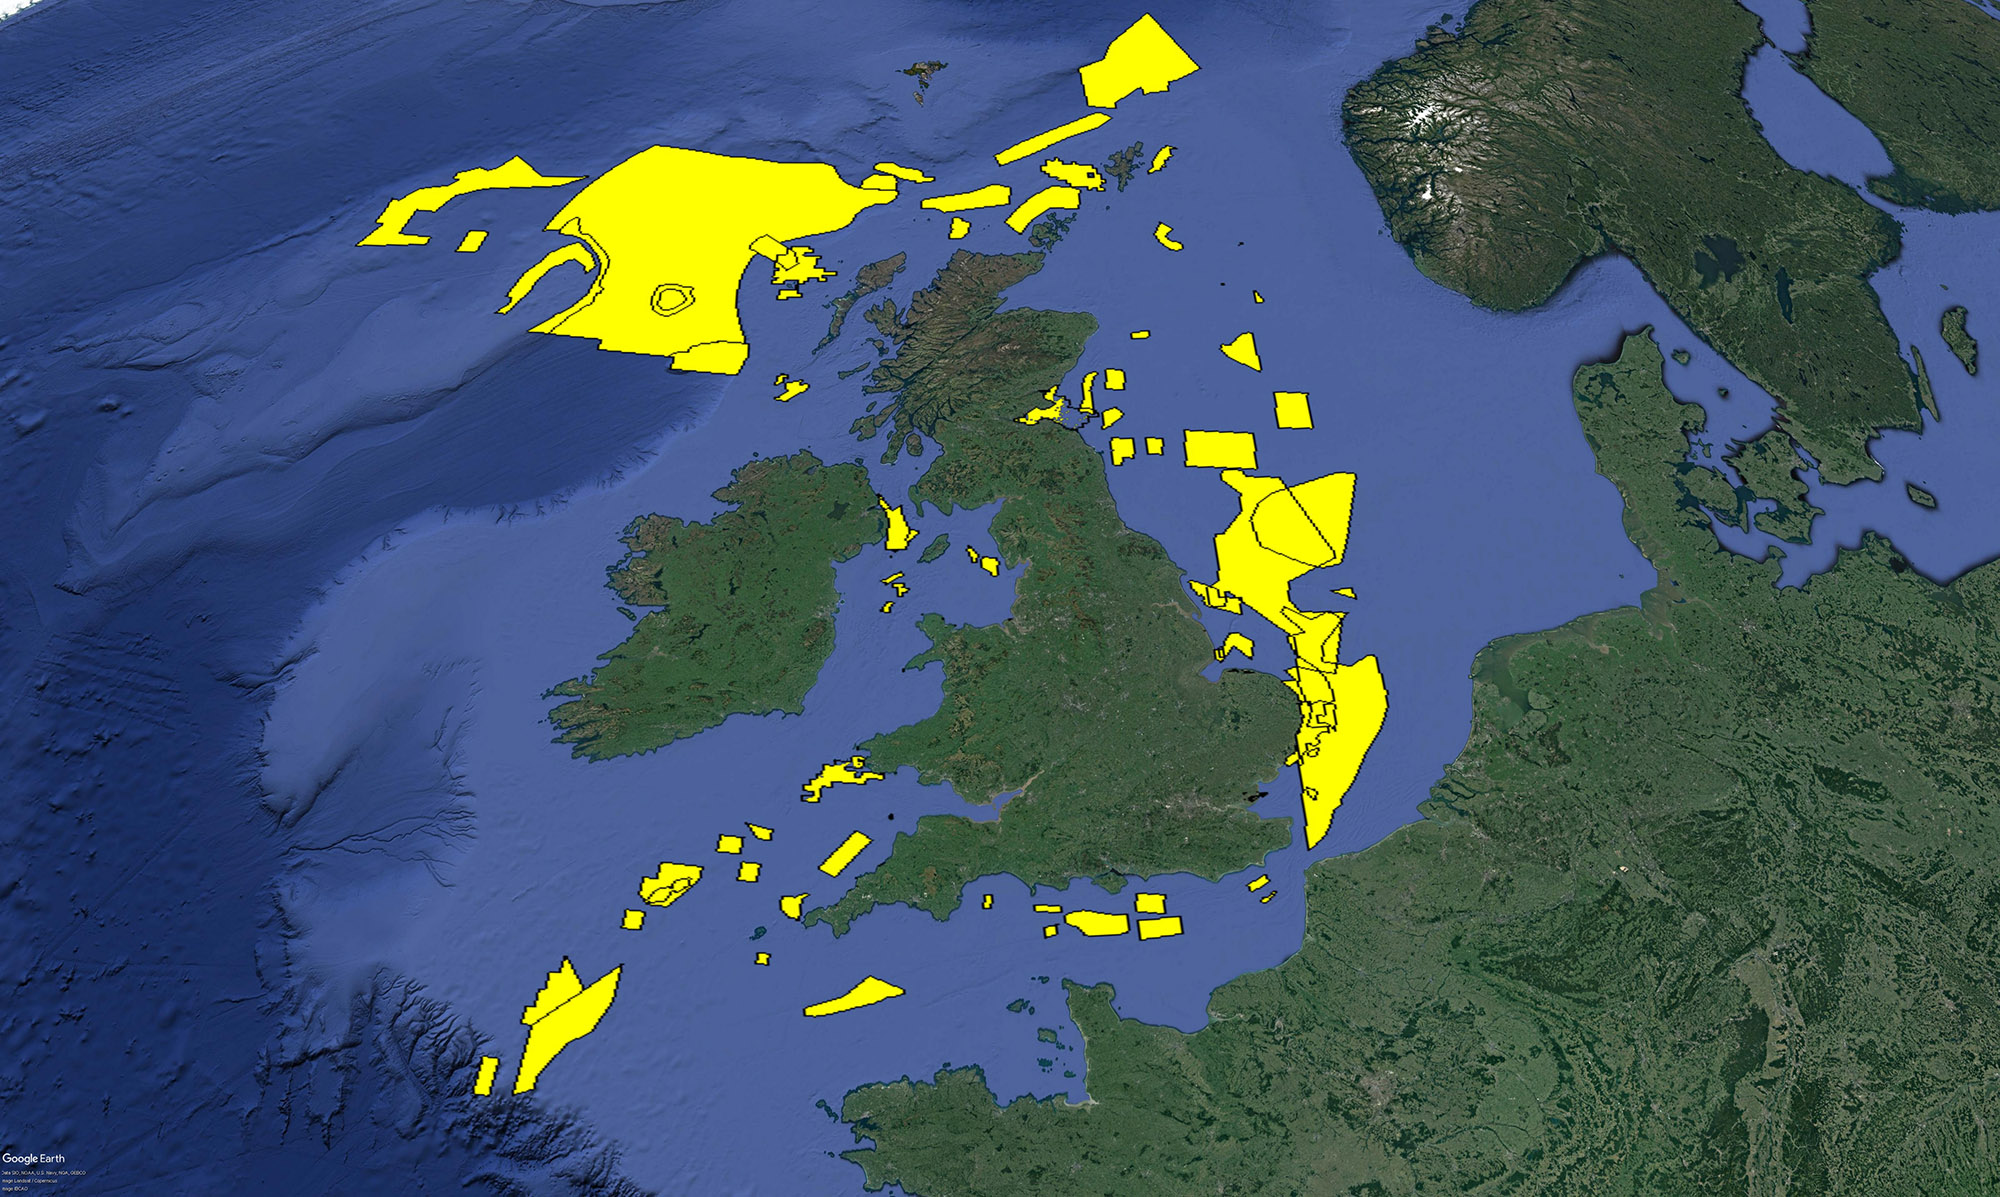 A map of the UK, showing offshore Marine Protected Areas scattered around the coast.